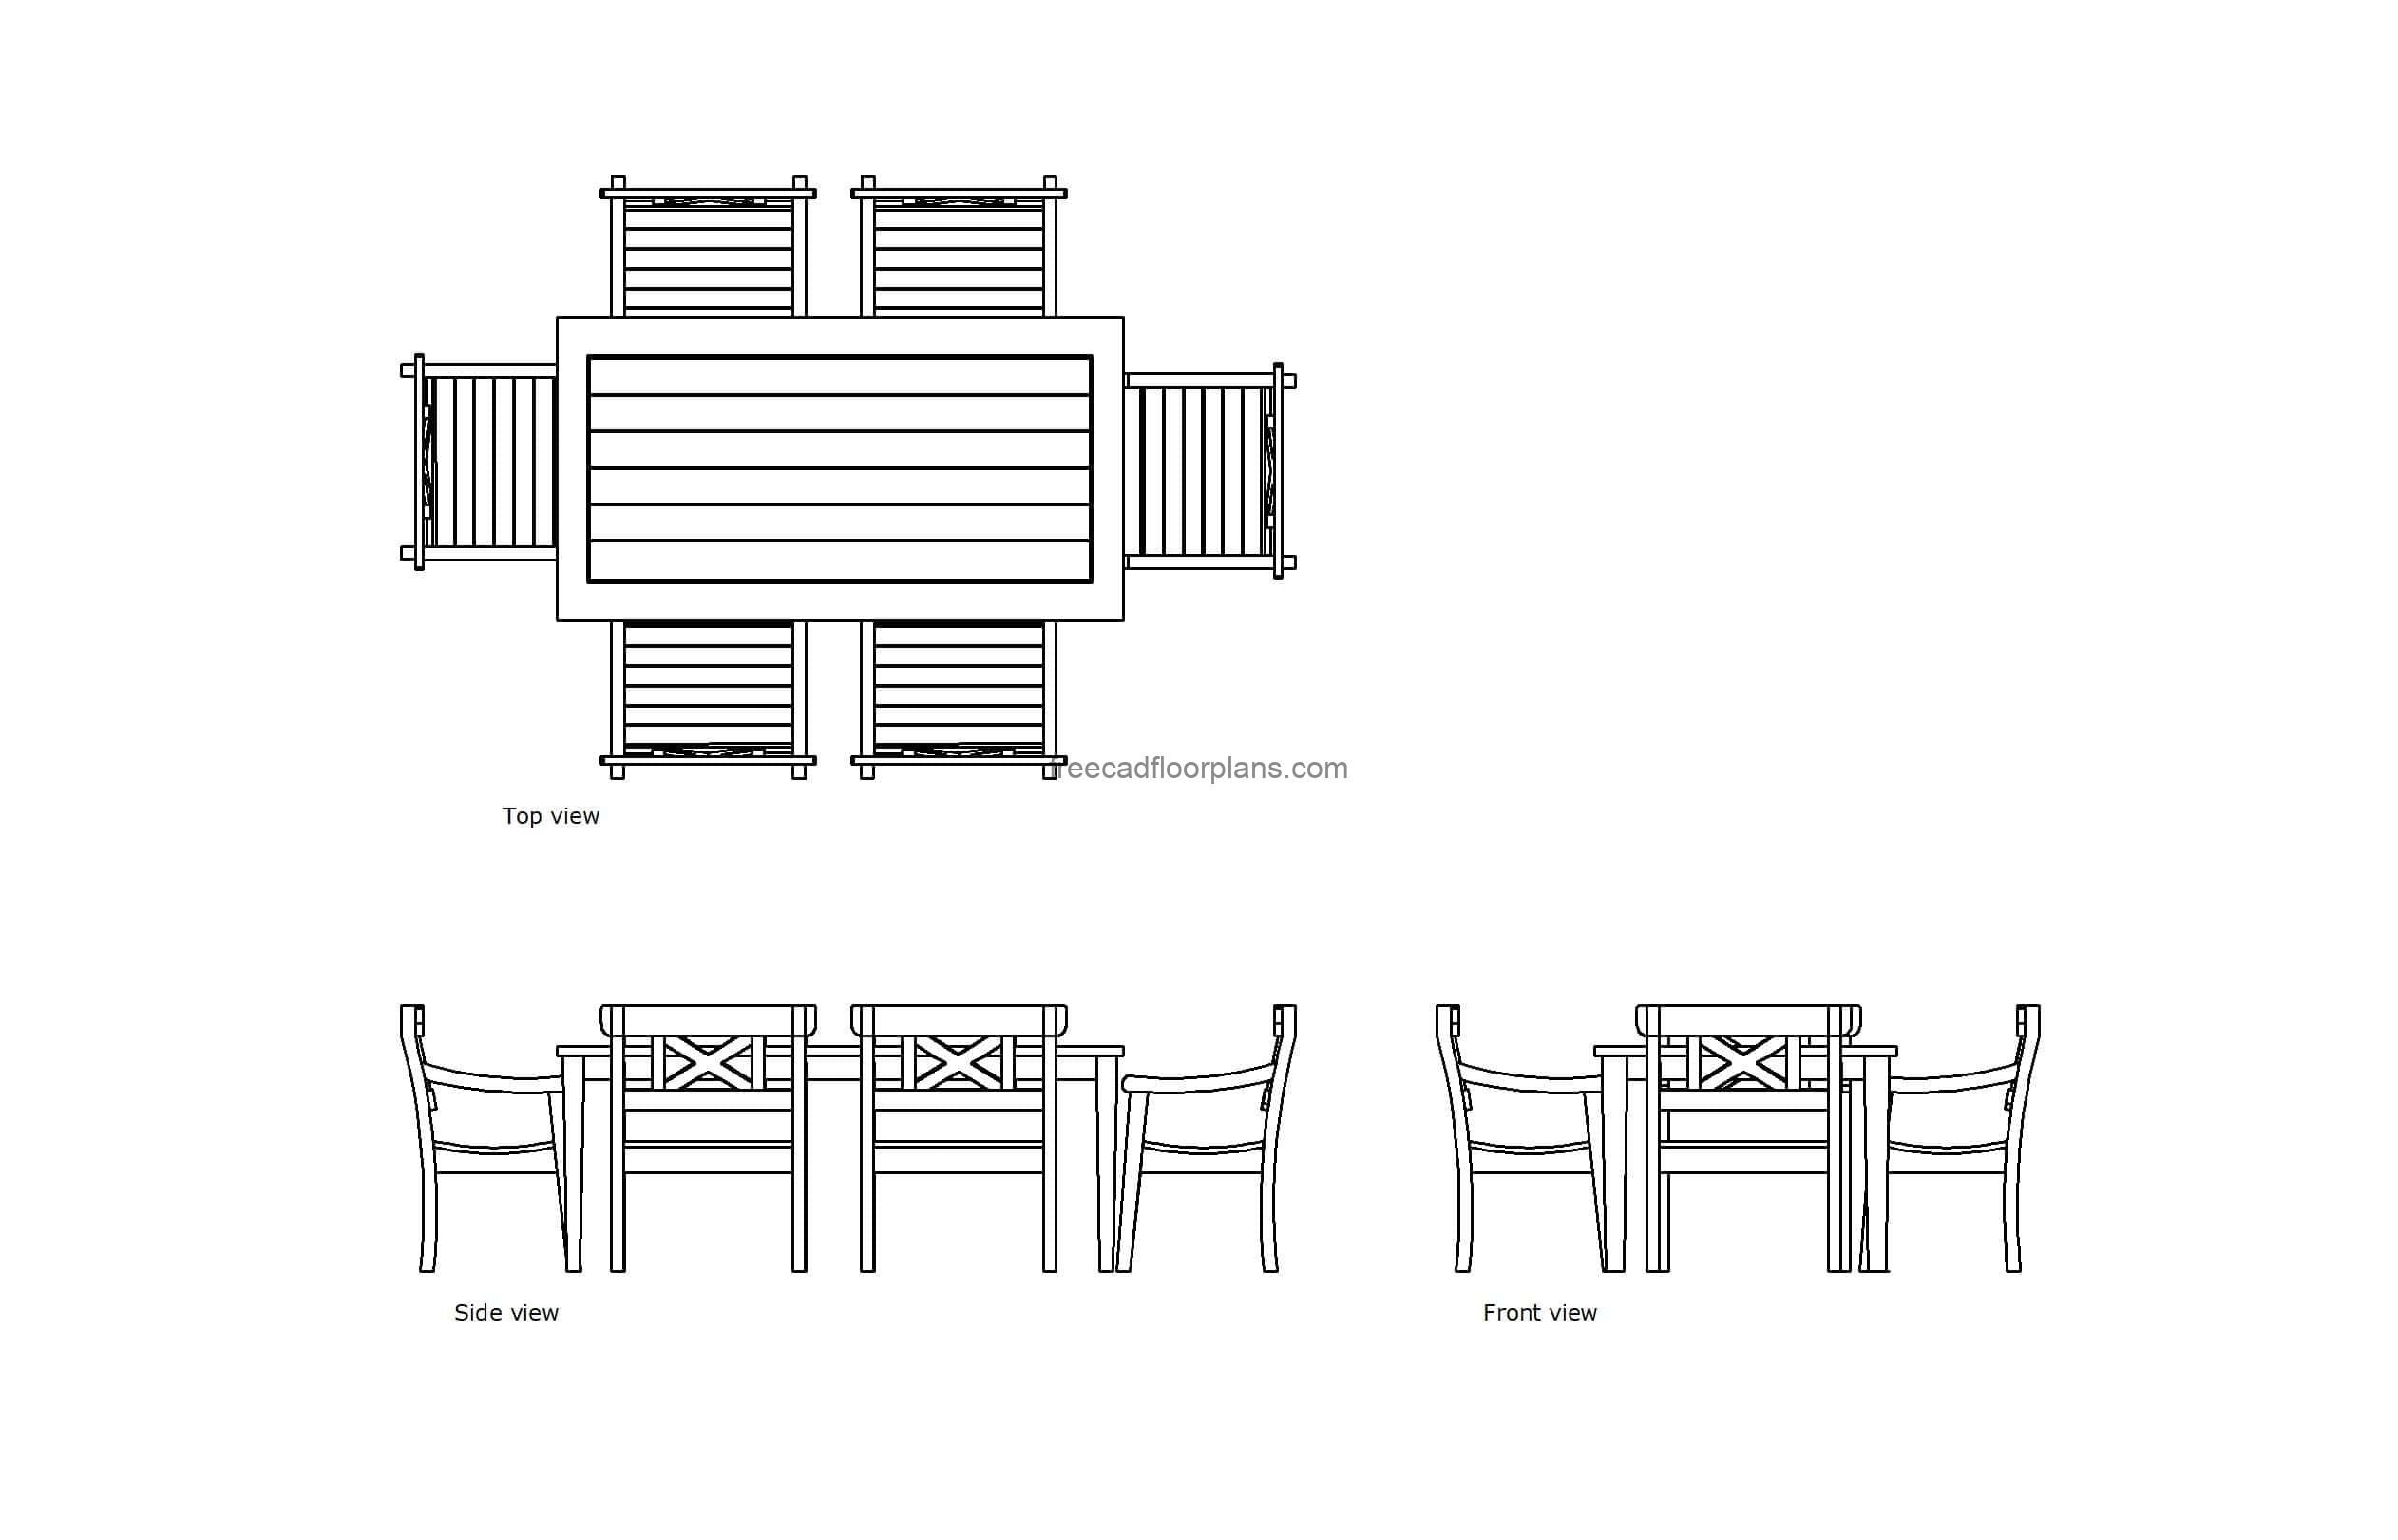 autocad drawing of a pato dining set, plan and elevation 2d views, dwg file free for download